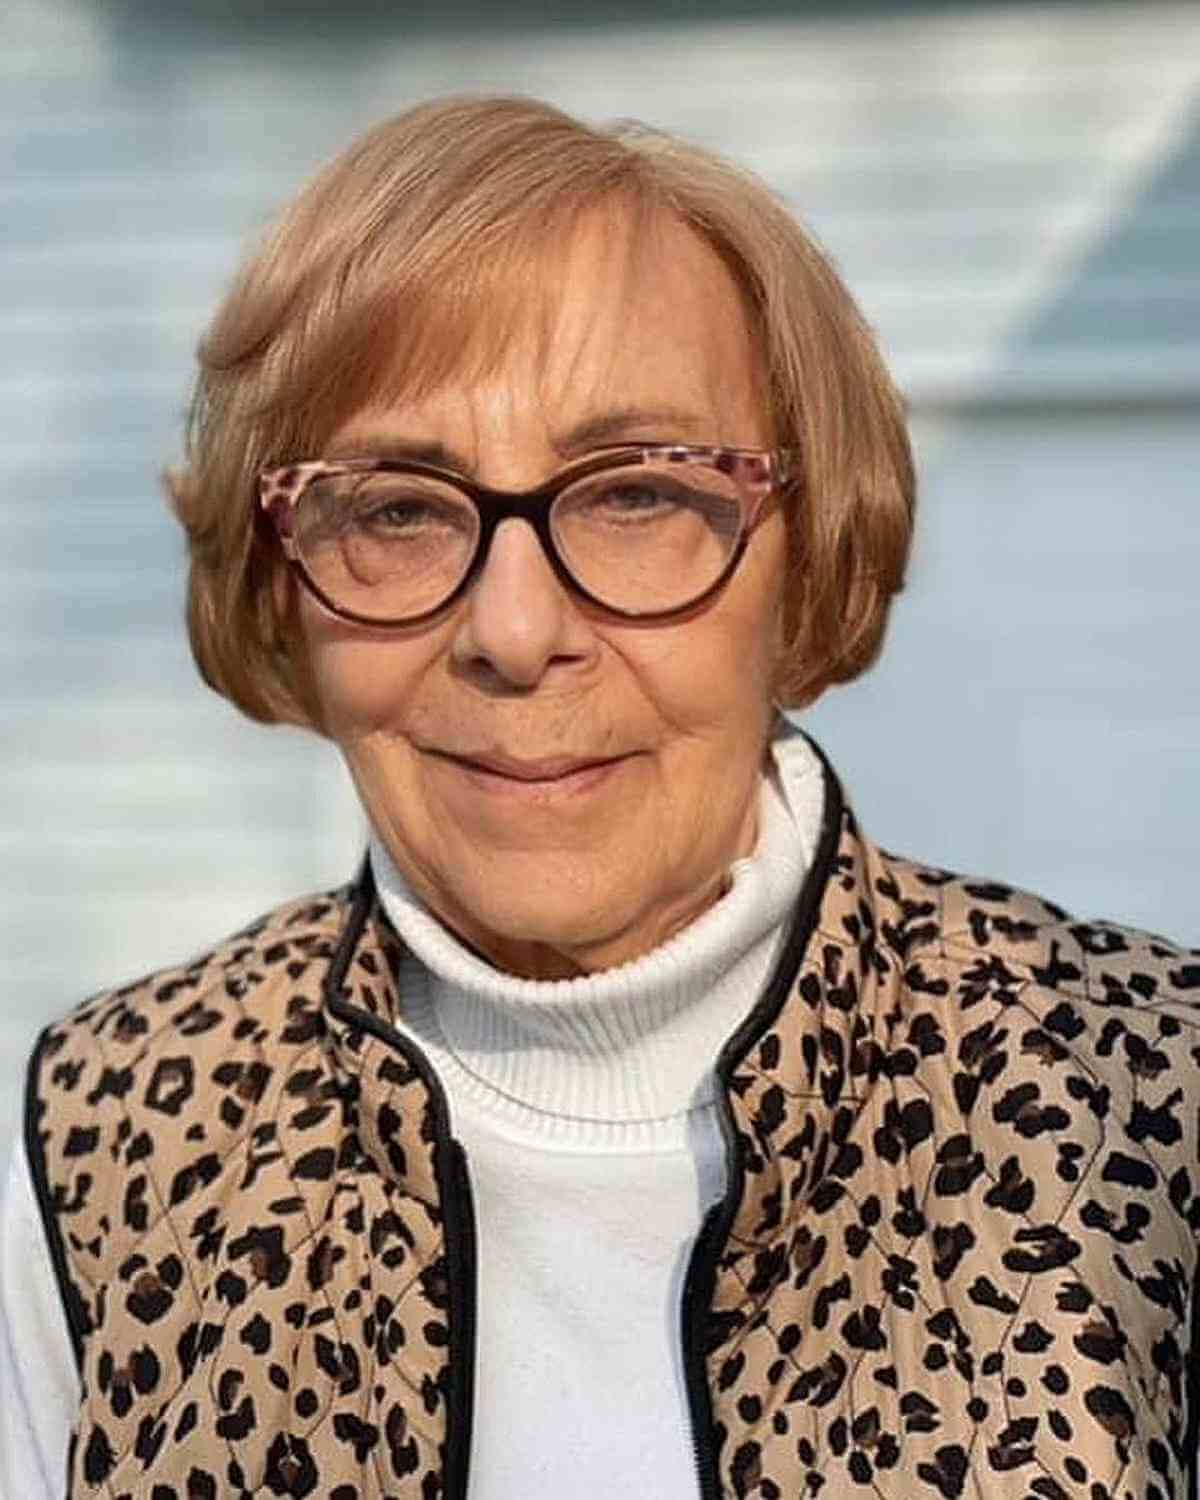 33 Flattering Short Hairstyles for Women Over 60 with Glasses